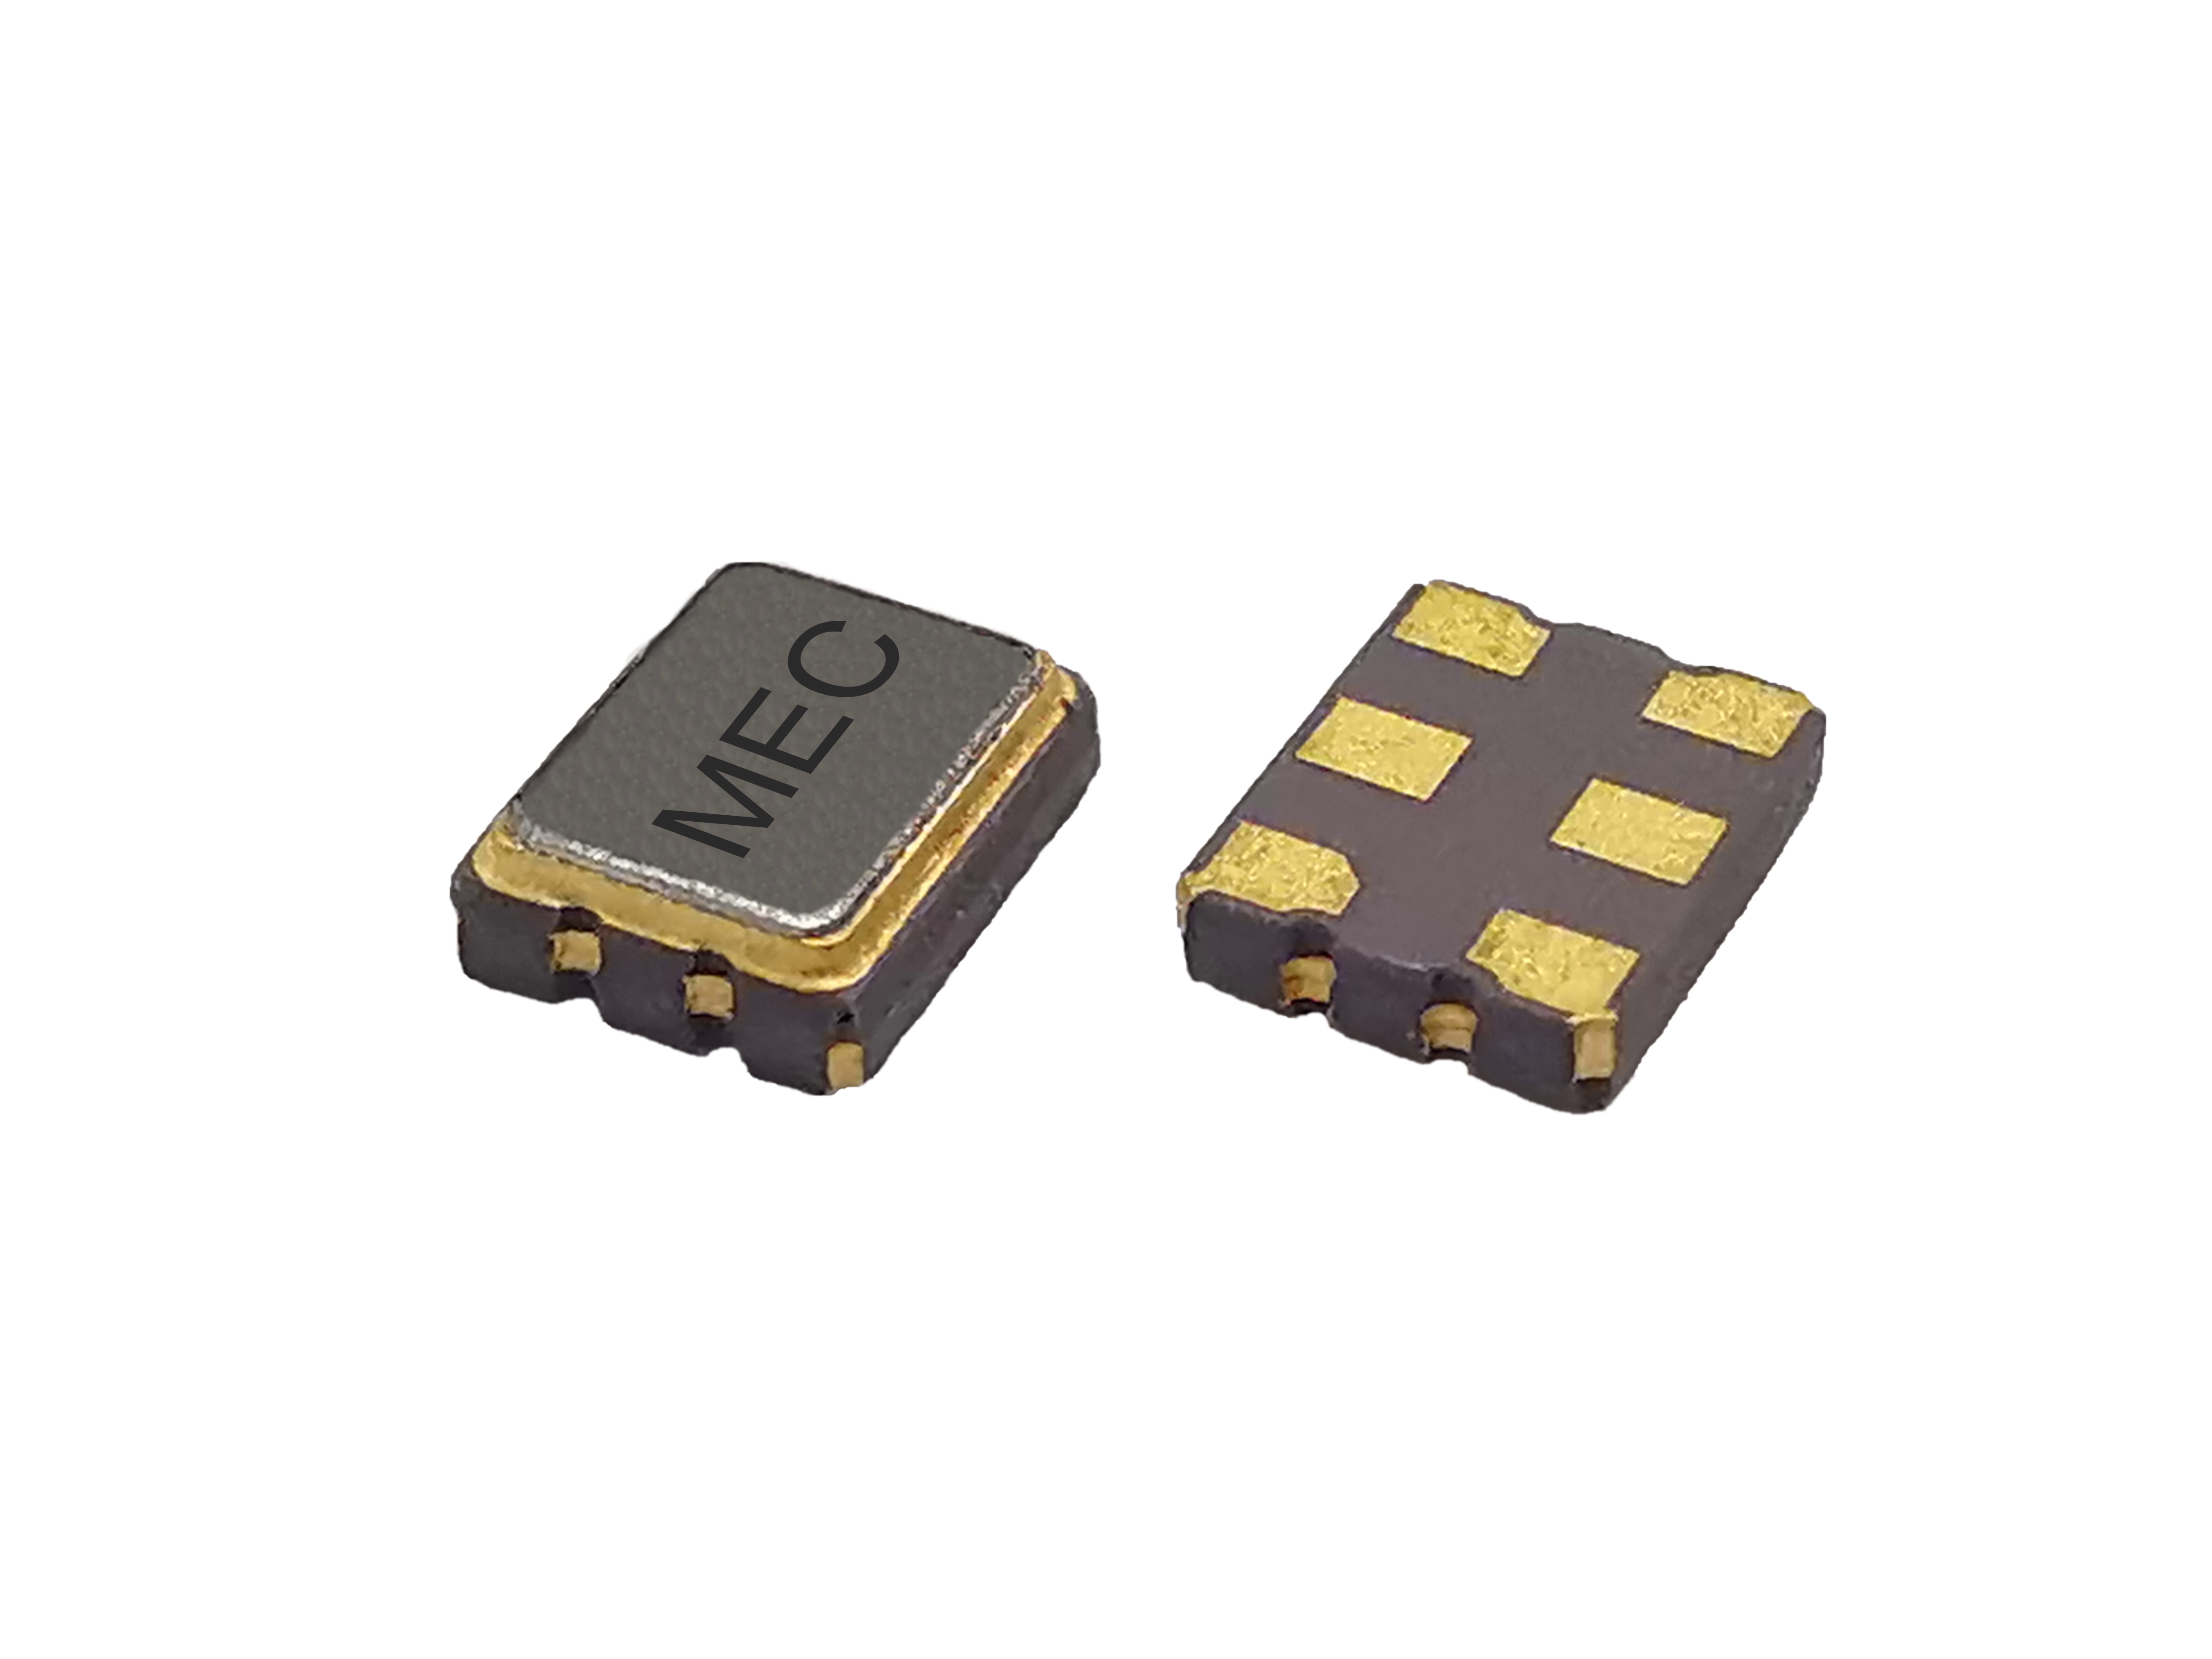 HCPQF326 3225 2.5V Quick-Turn Programmable Frequency Swithable Differential LVPECL SMD Crystal Oscillator